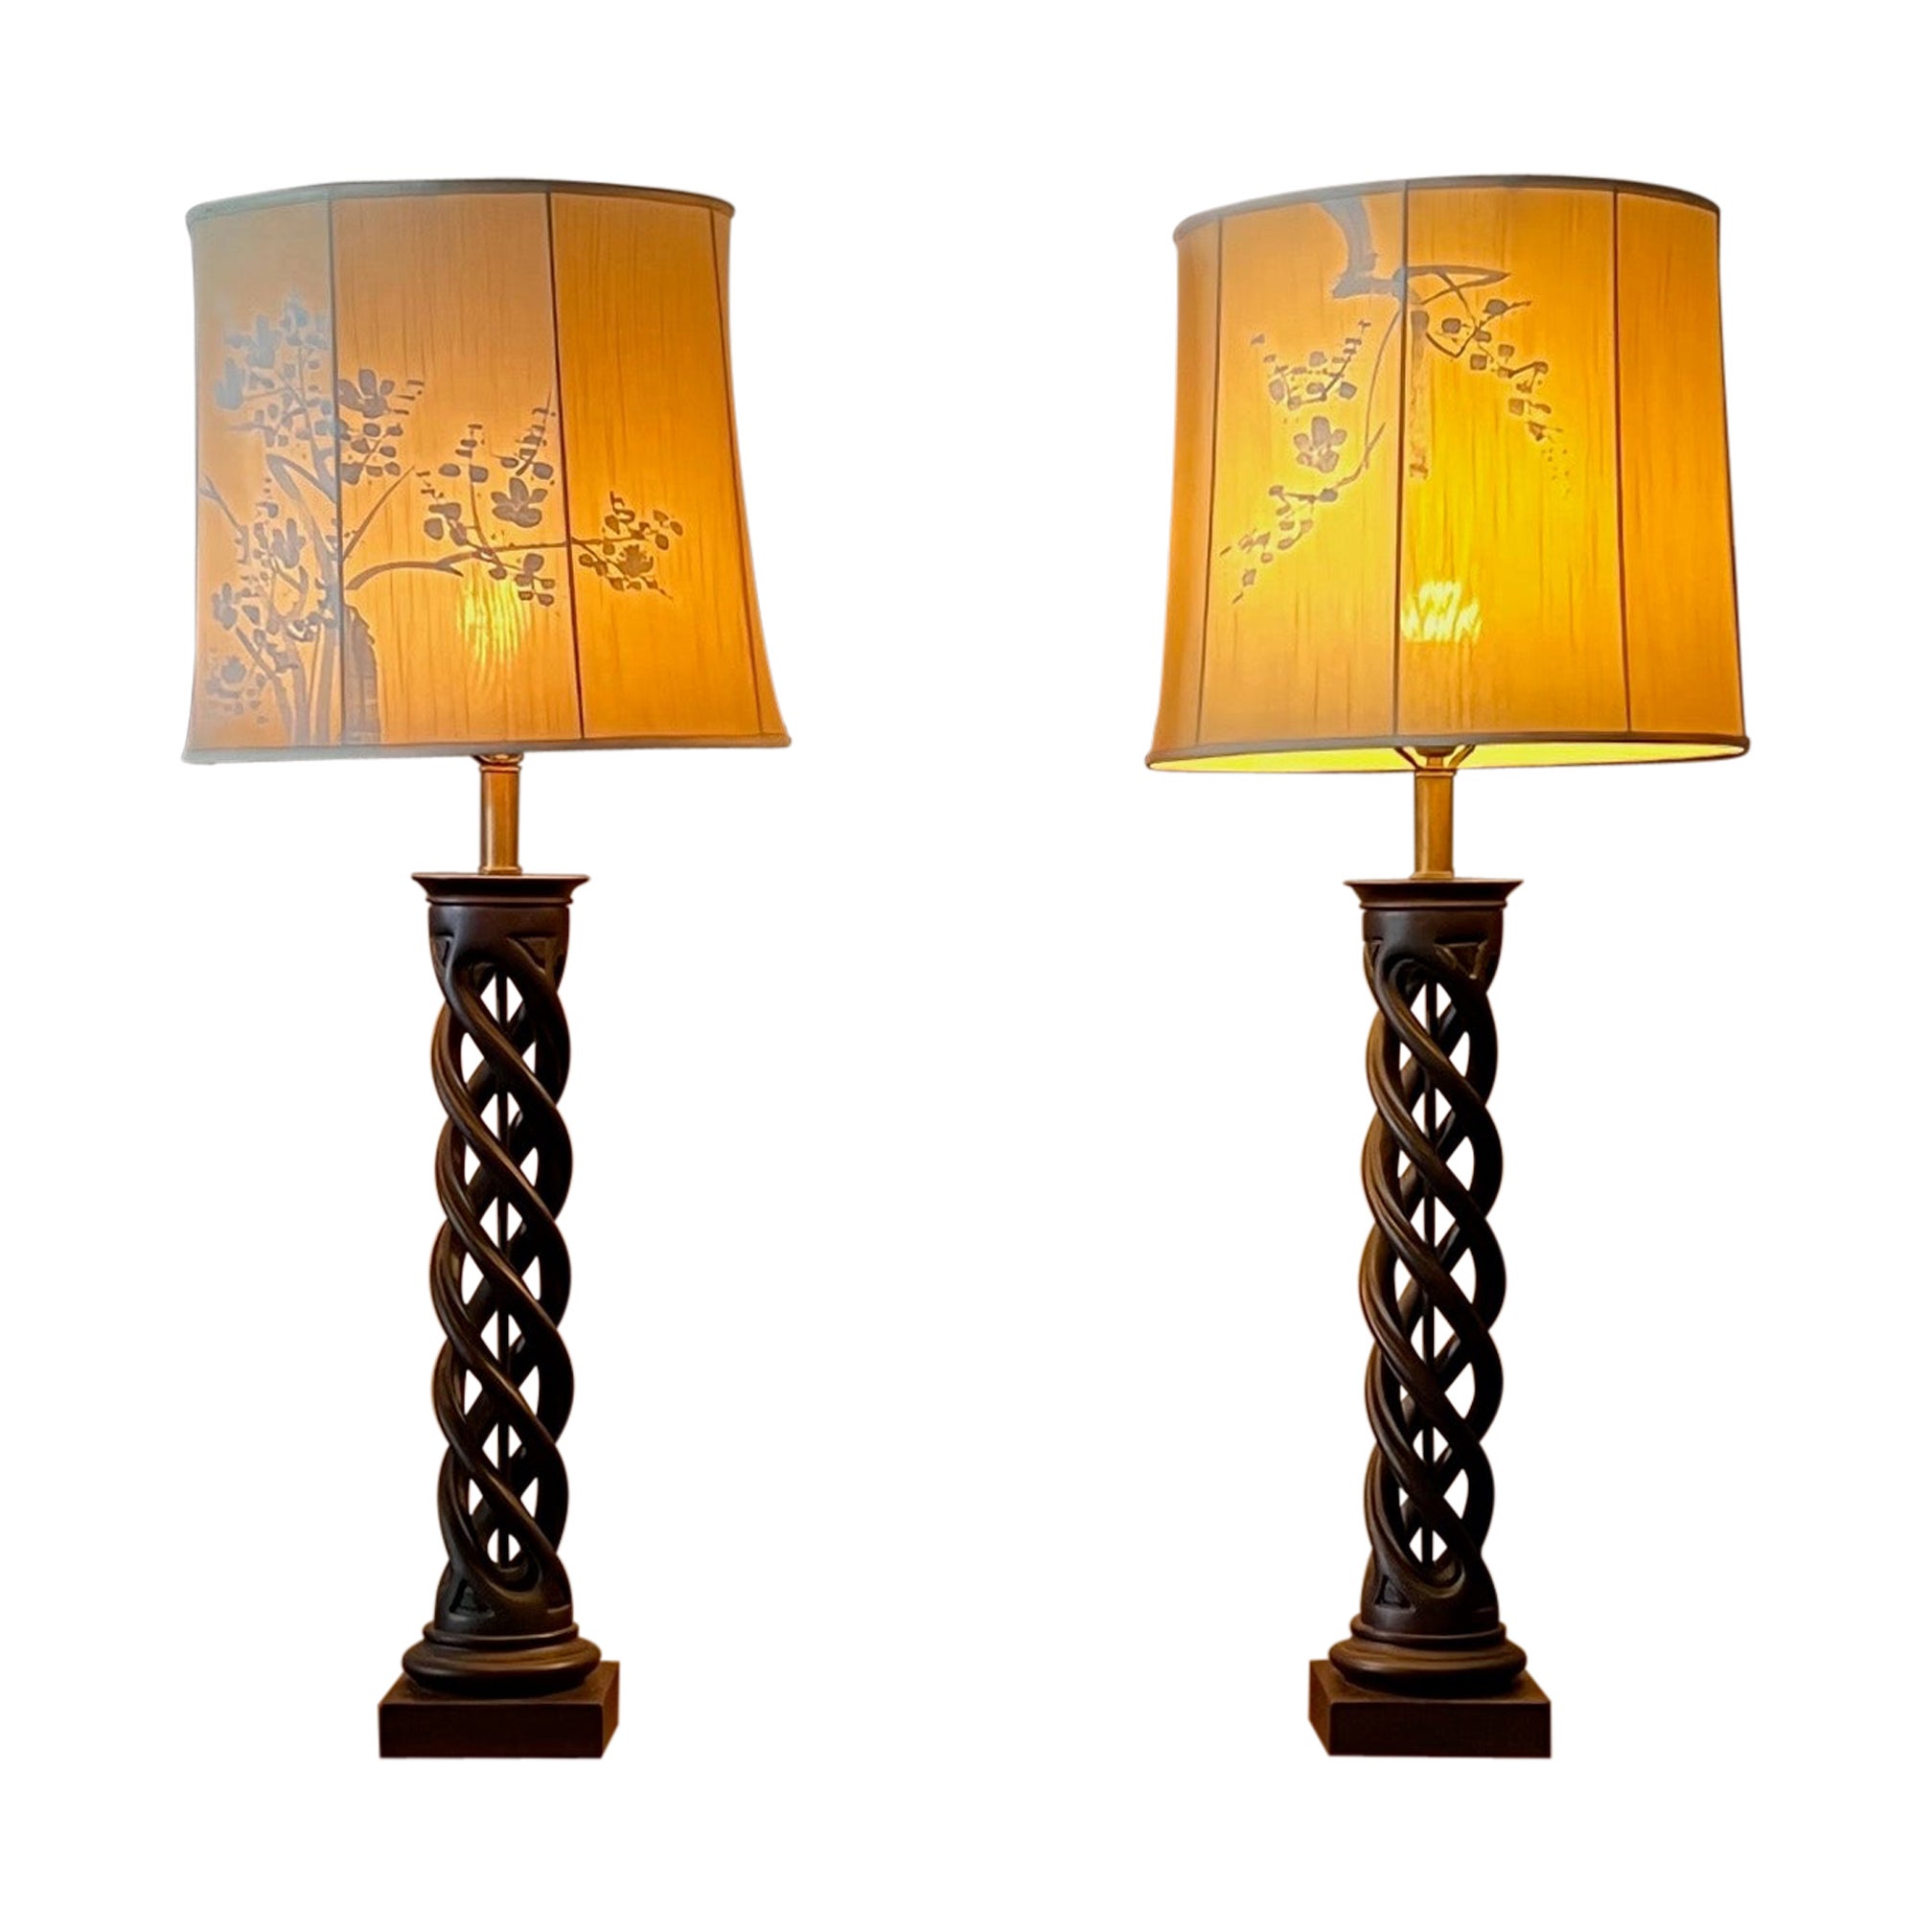 Pair of Frederick Cooper Helix Lamps